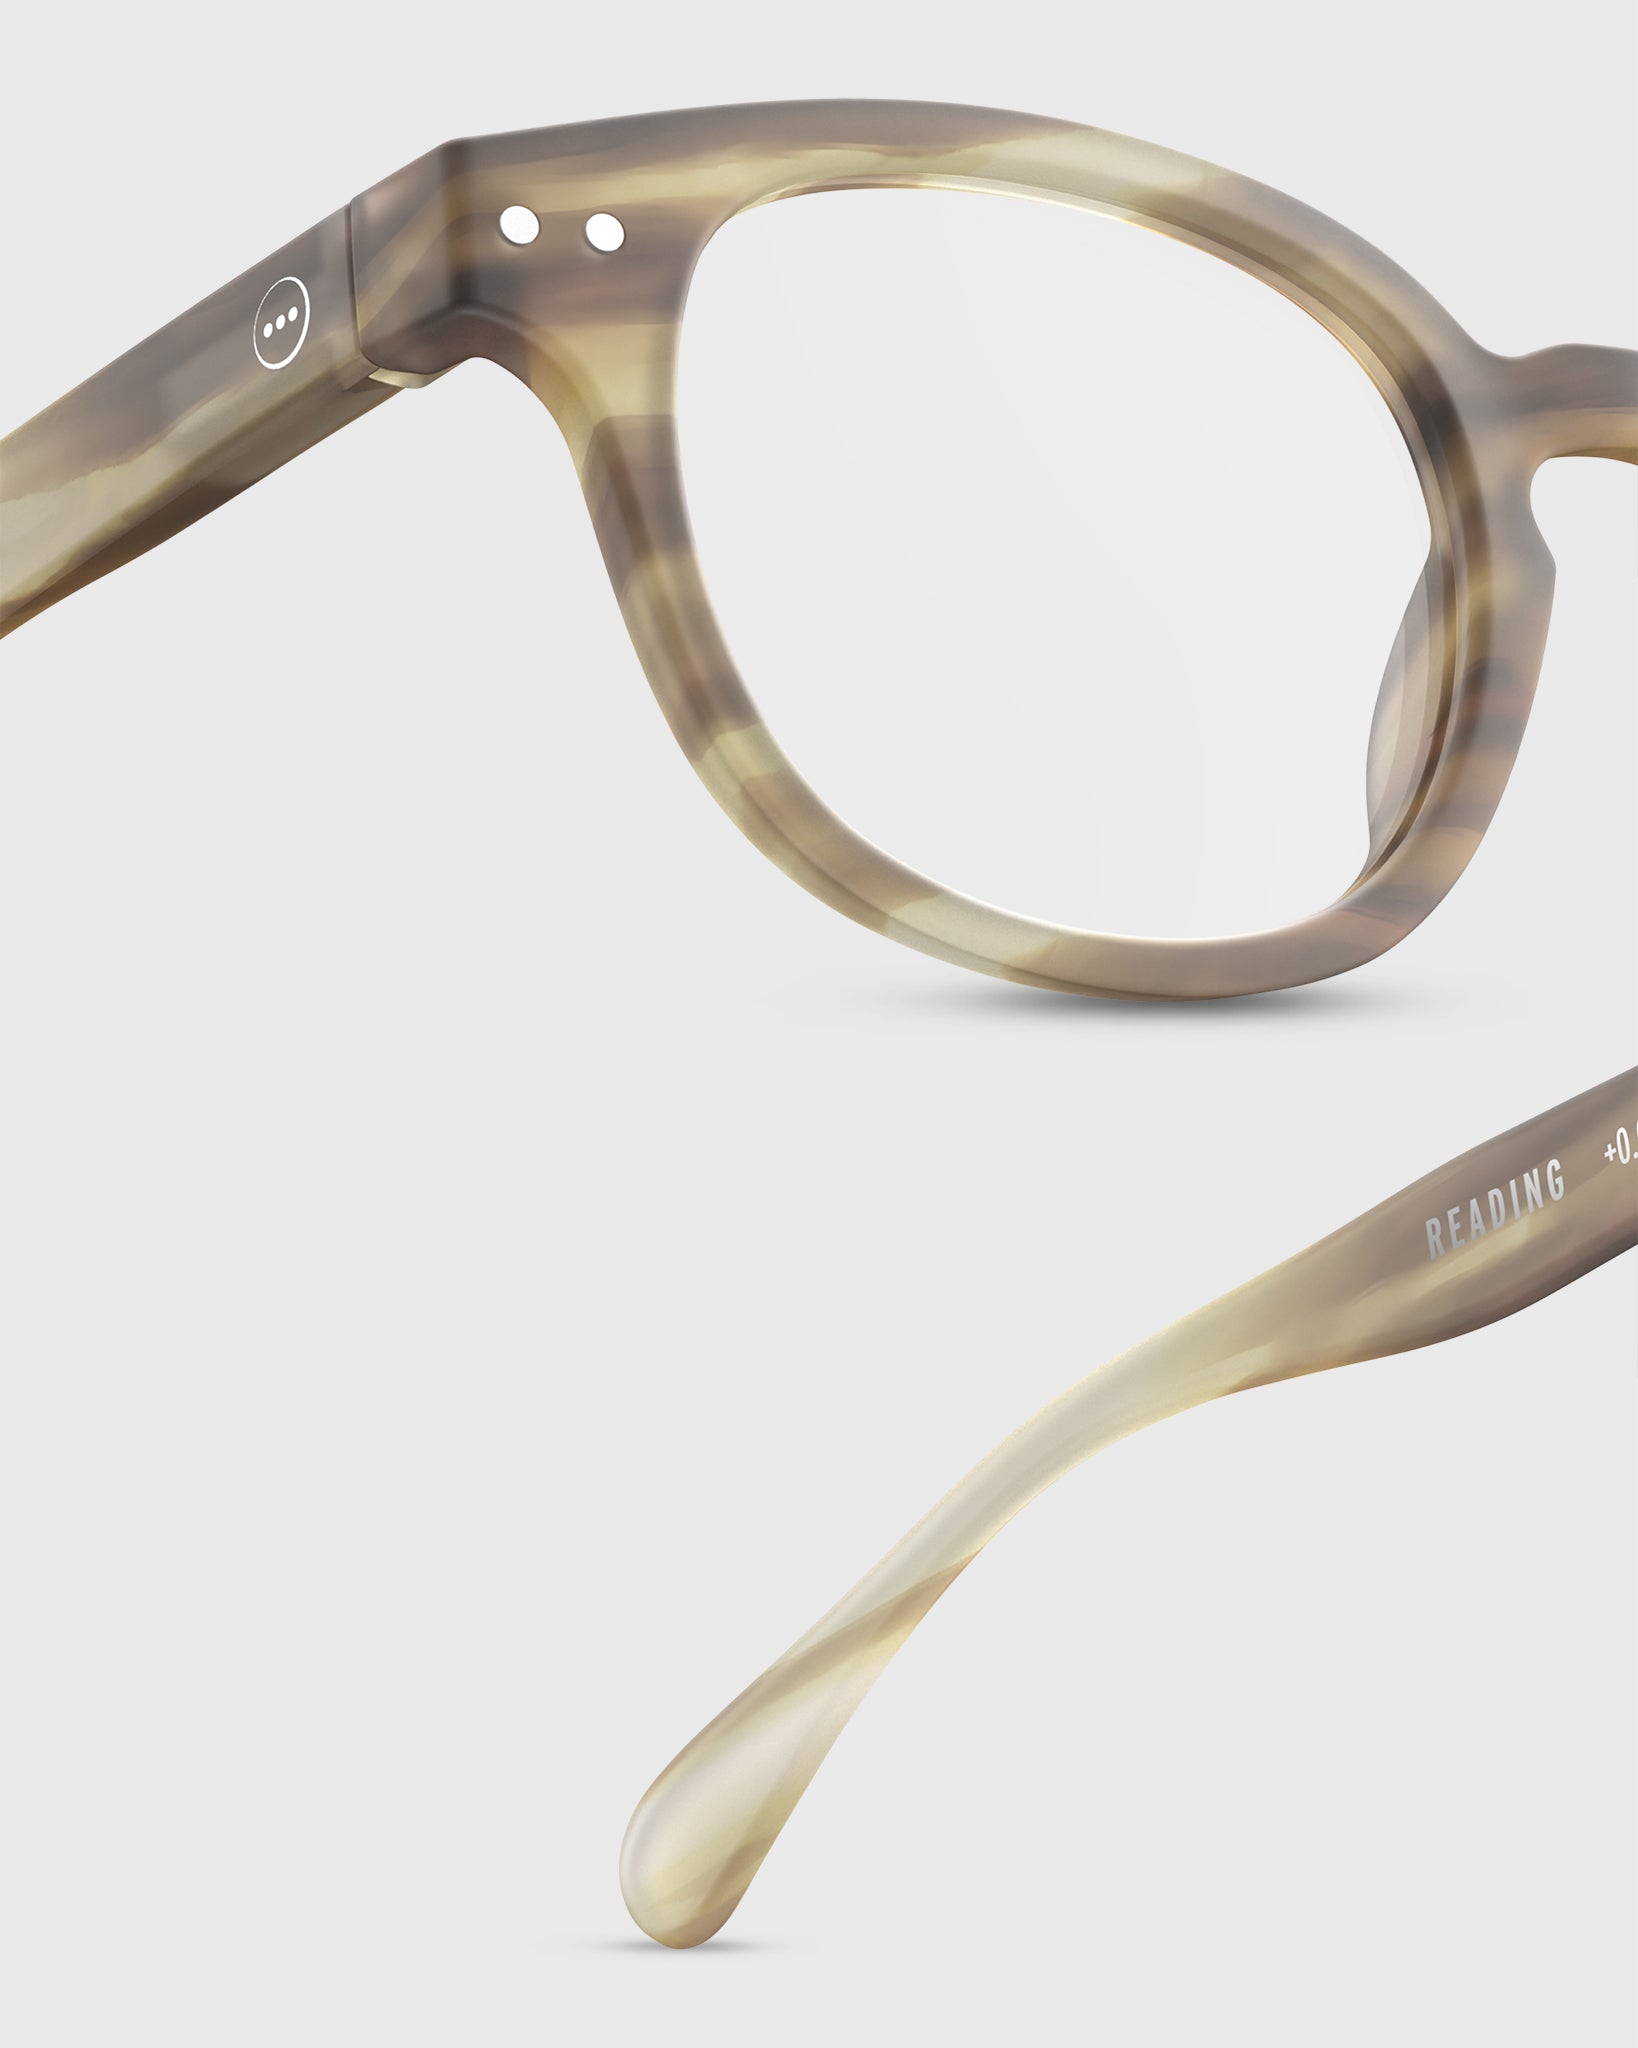 Limited Edition #C Reading Glasses in Smokey Brown